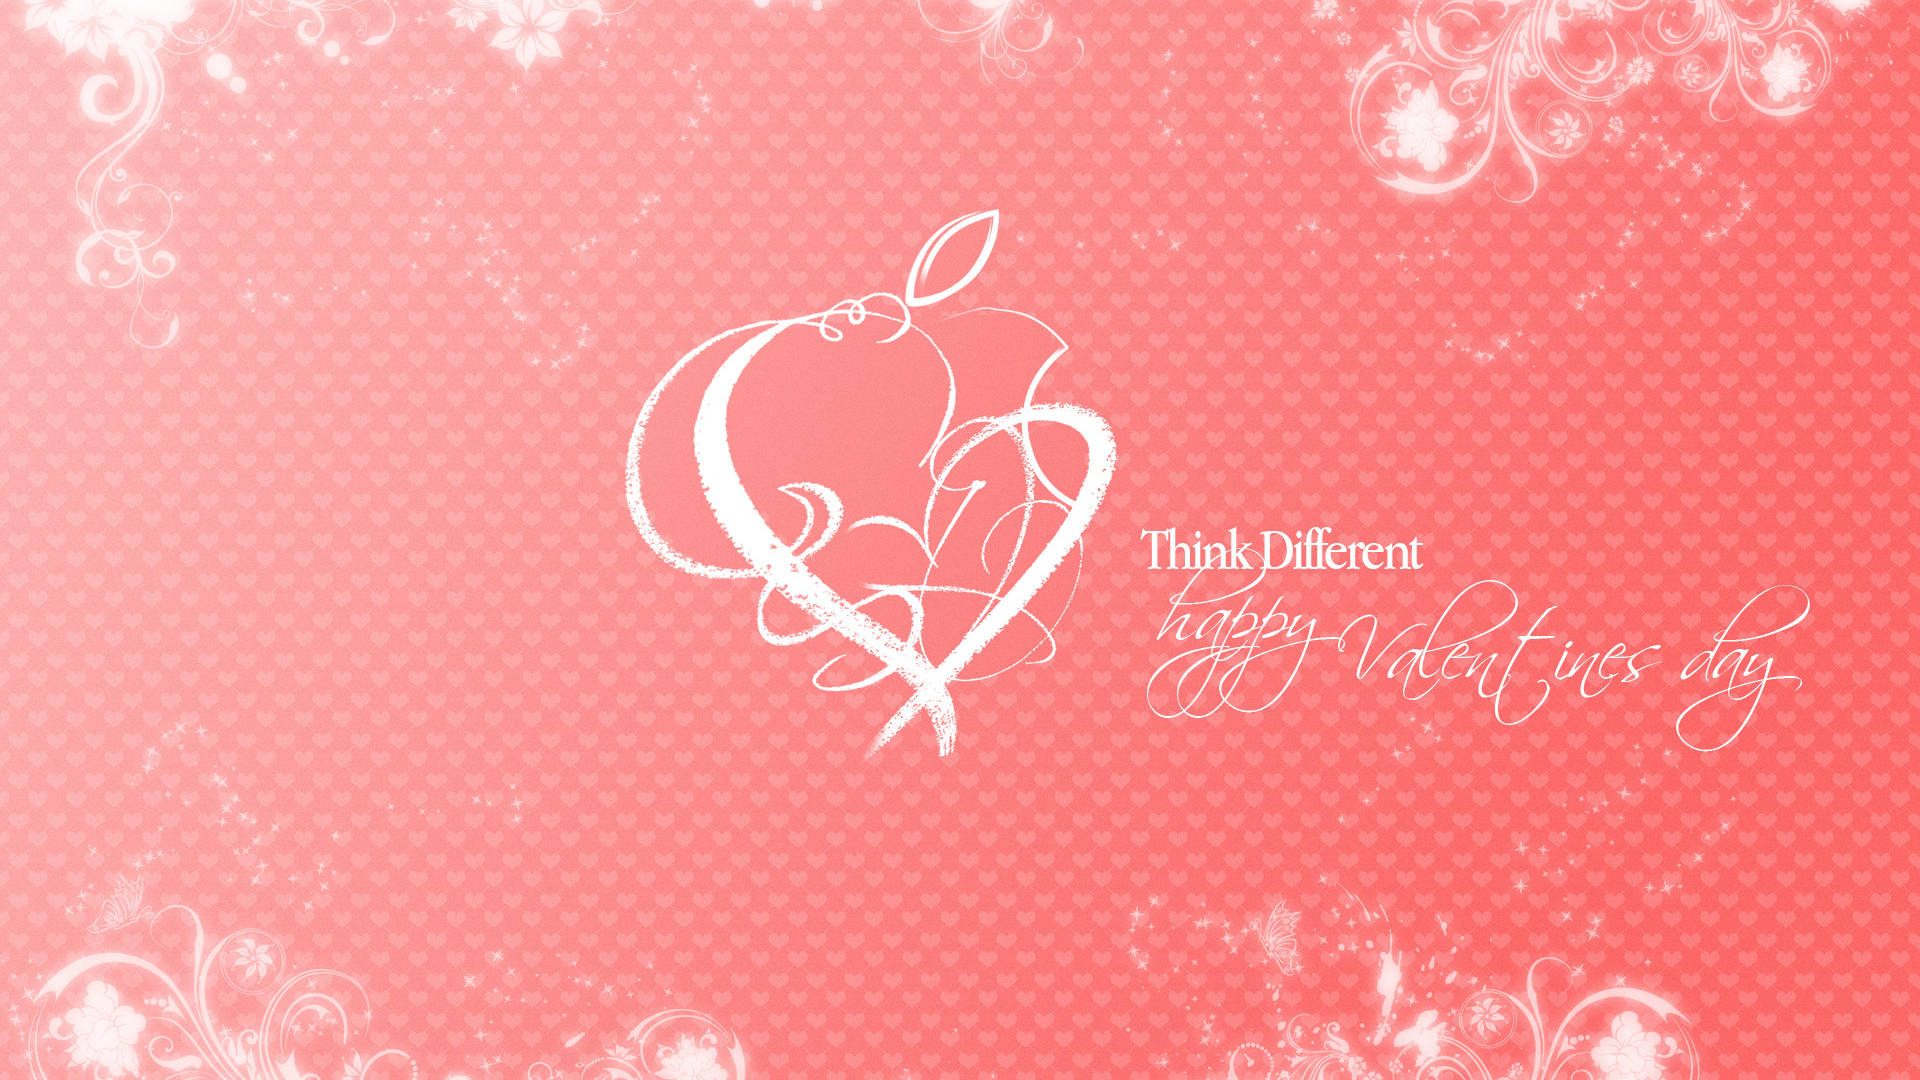 Image Spread Love And Joy In February With Valentines Day Background